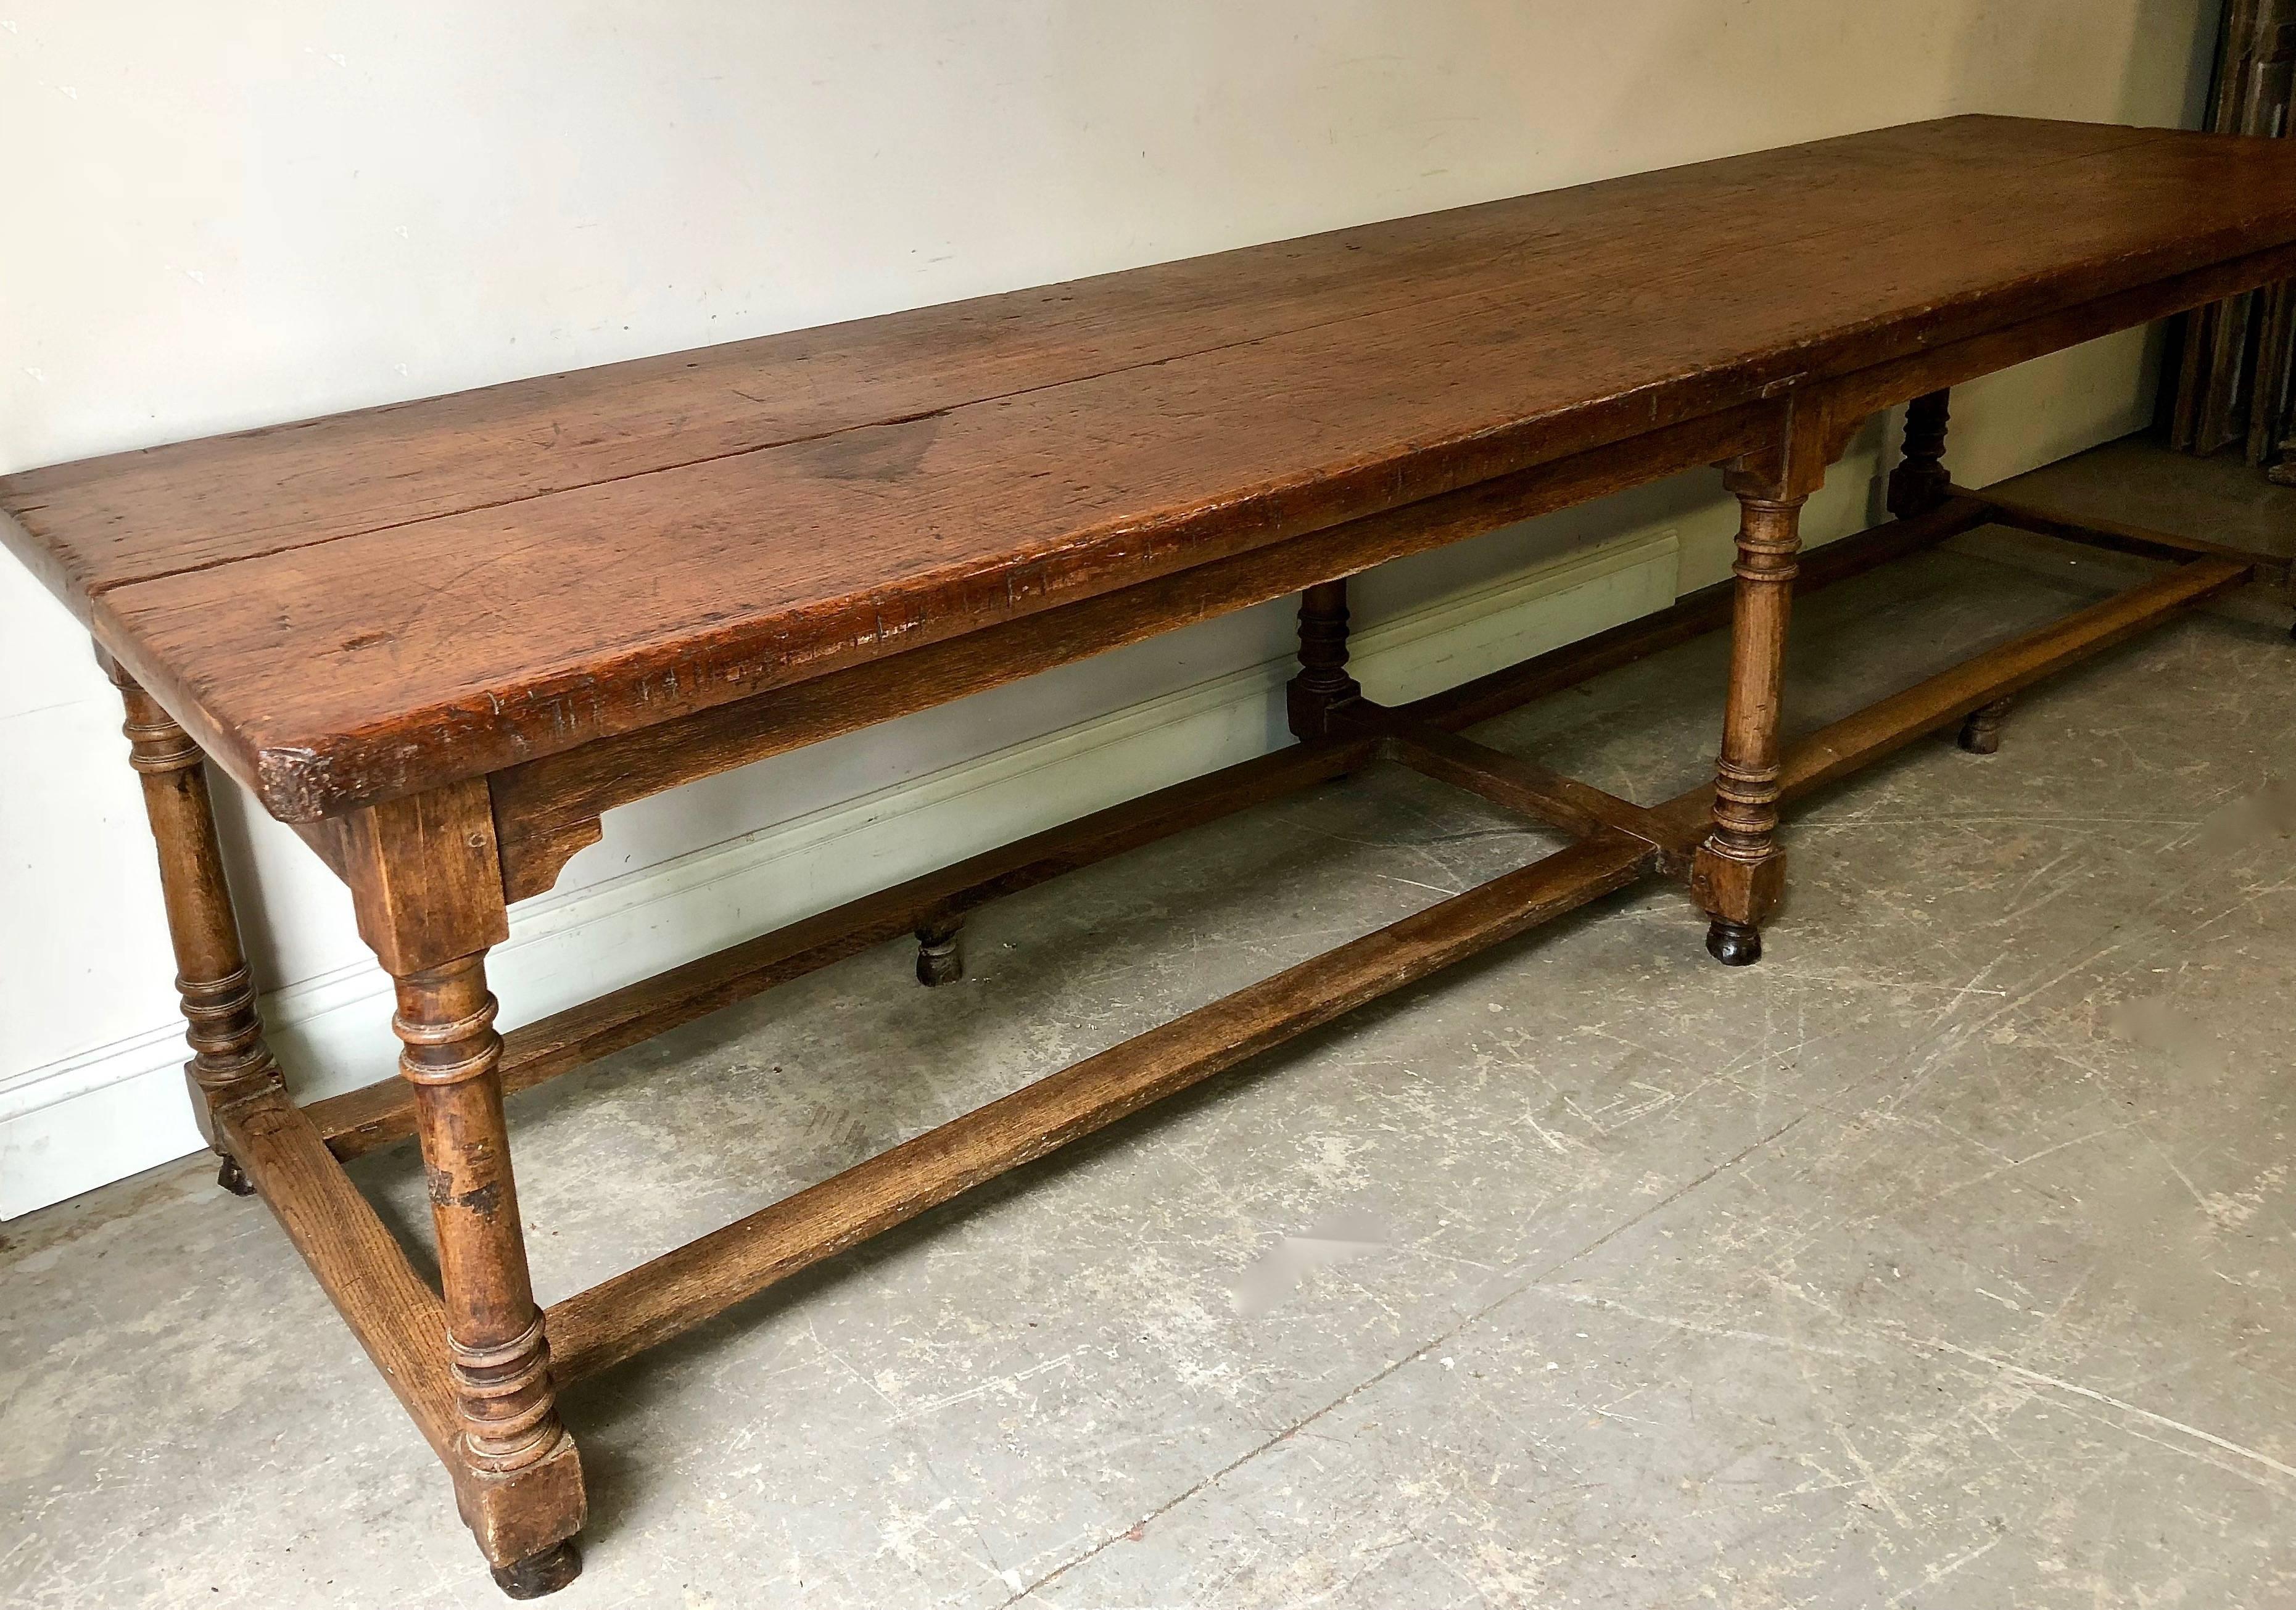 Very large 18th century oak French Monastery balustrade table with top wide solid planks - all in handsome original patina.
Toulouse, France, 18th century.